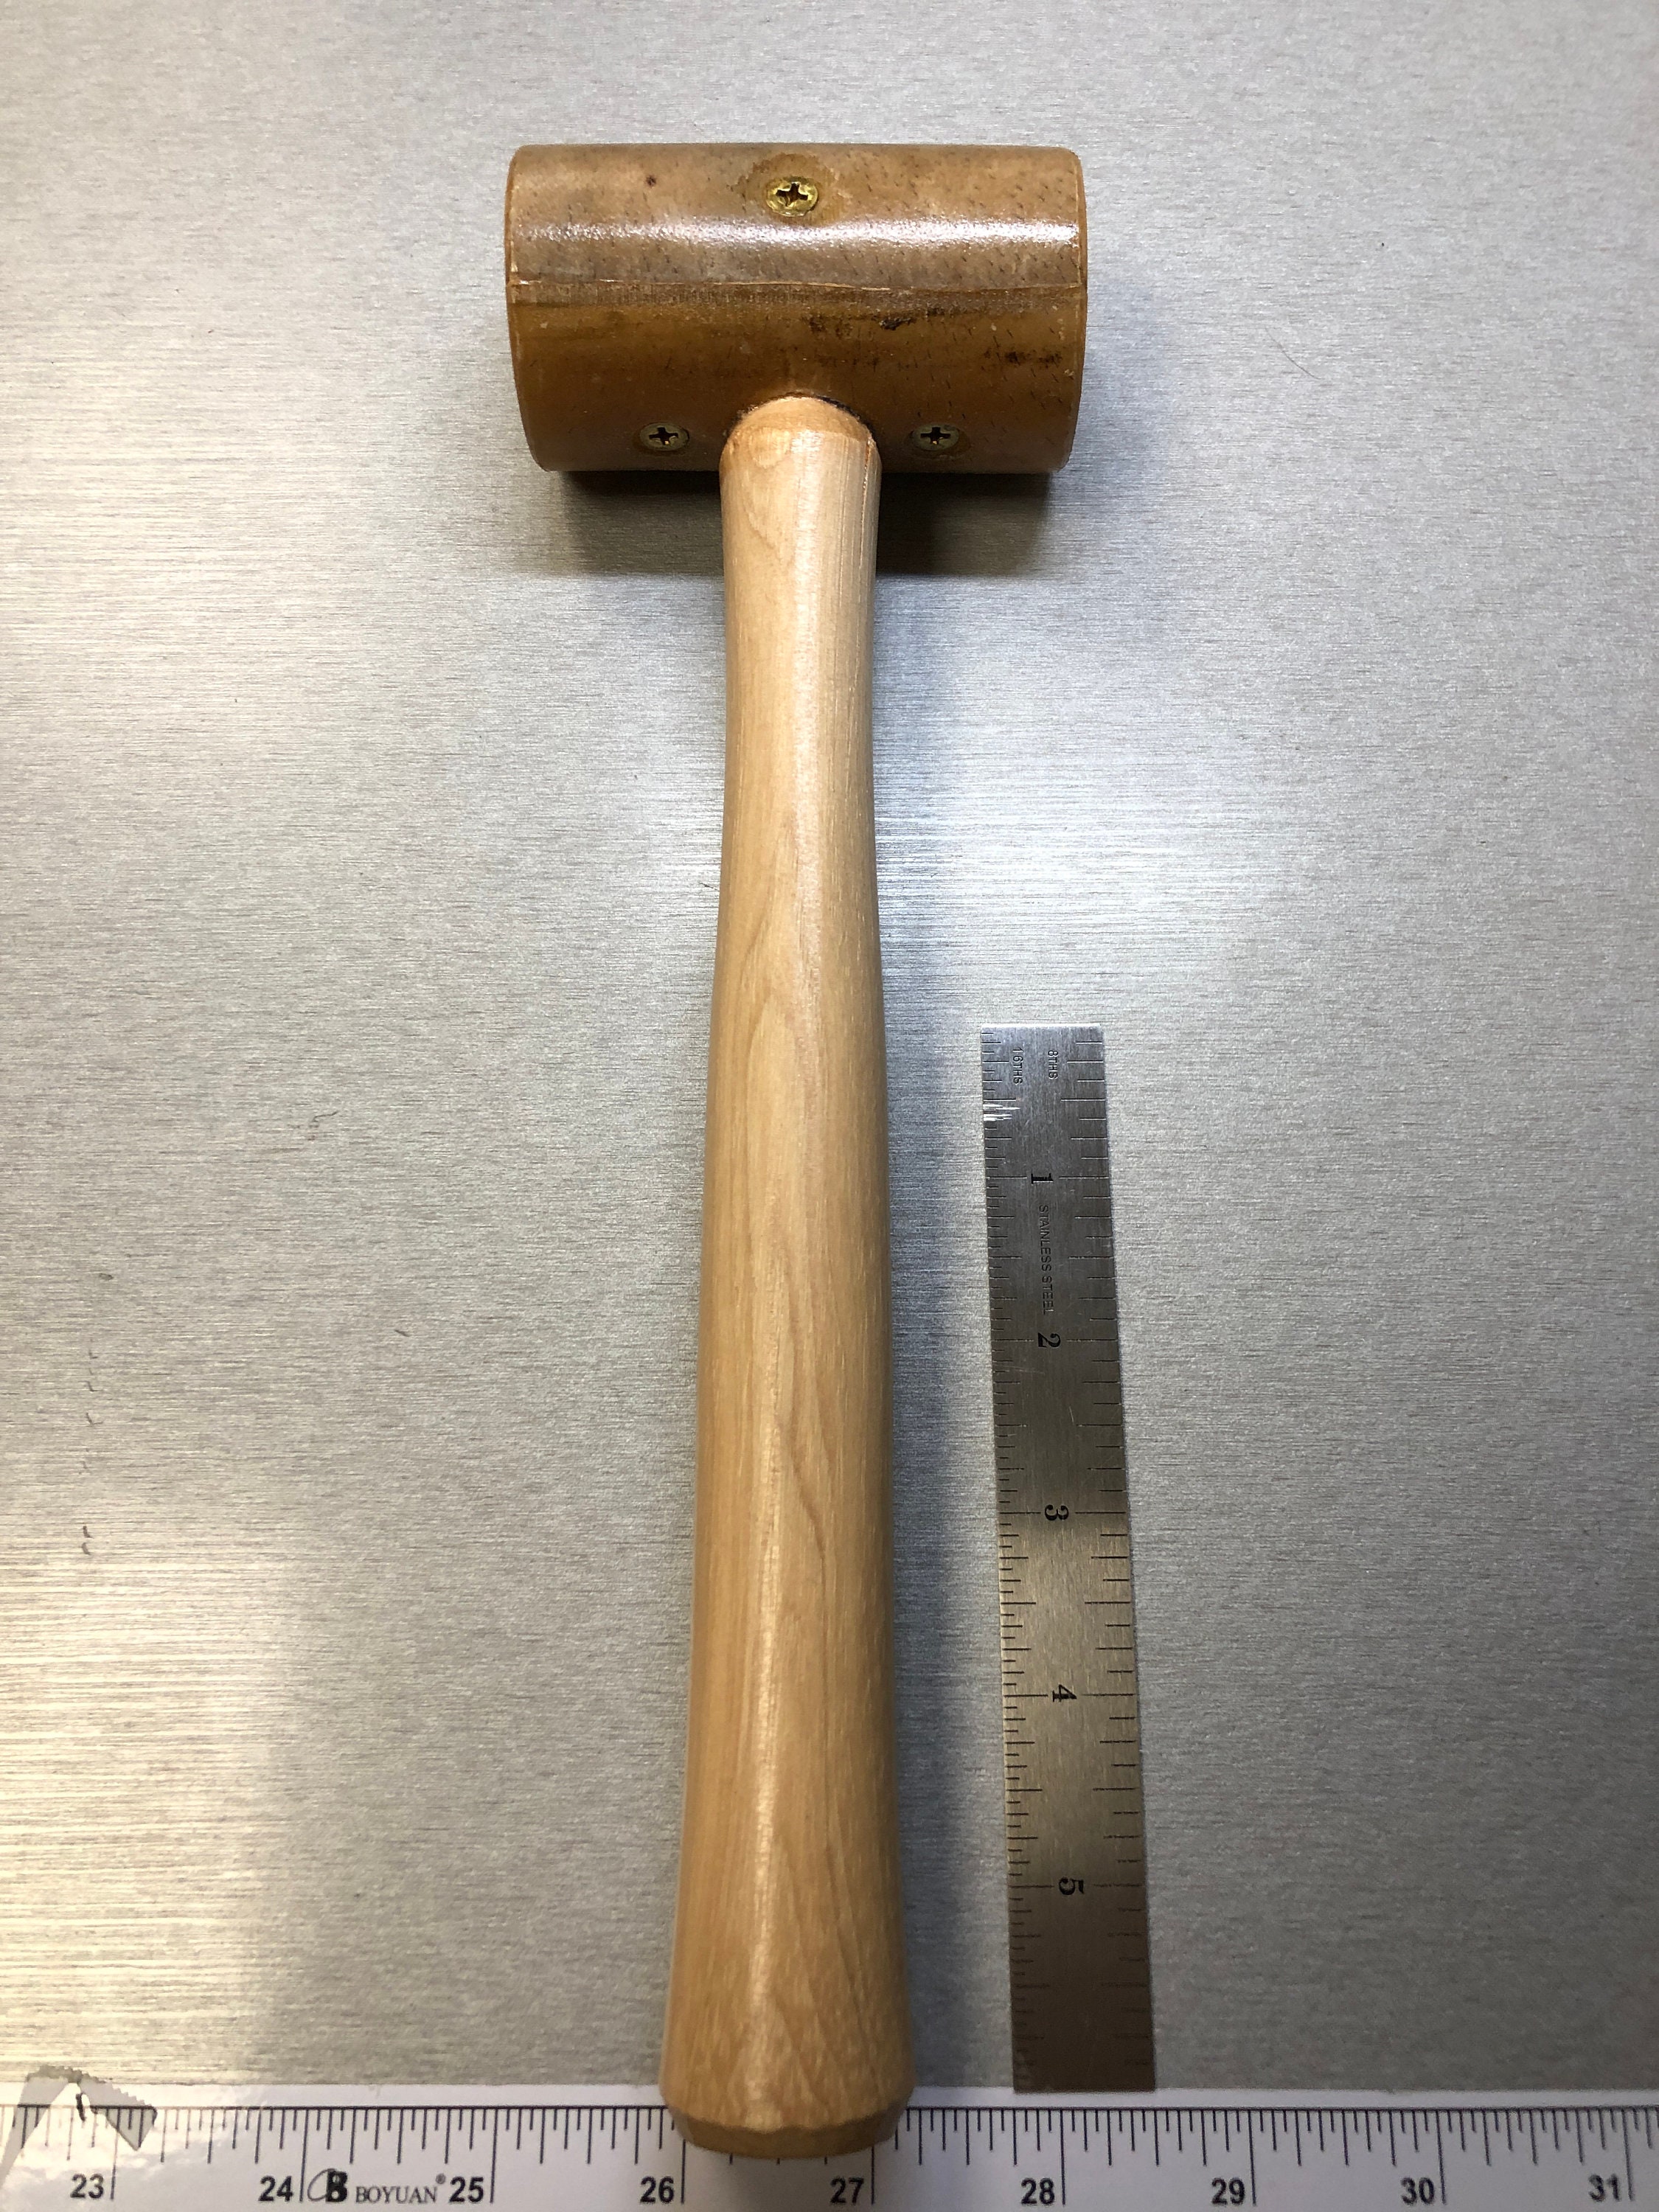 Rawhide Mallet Size 4 Tool